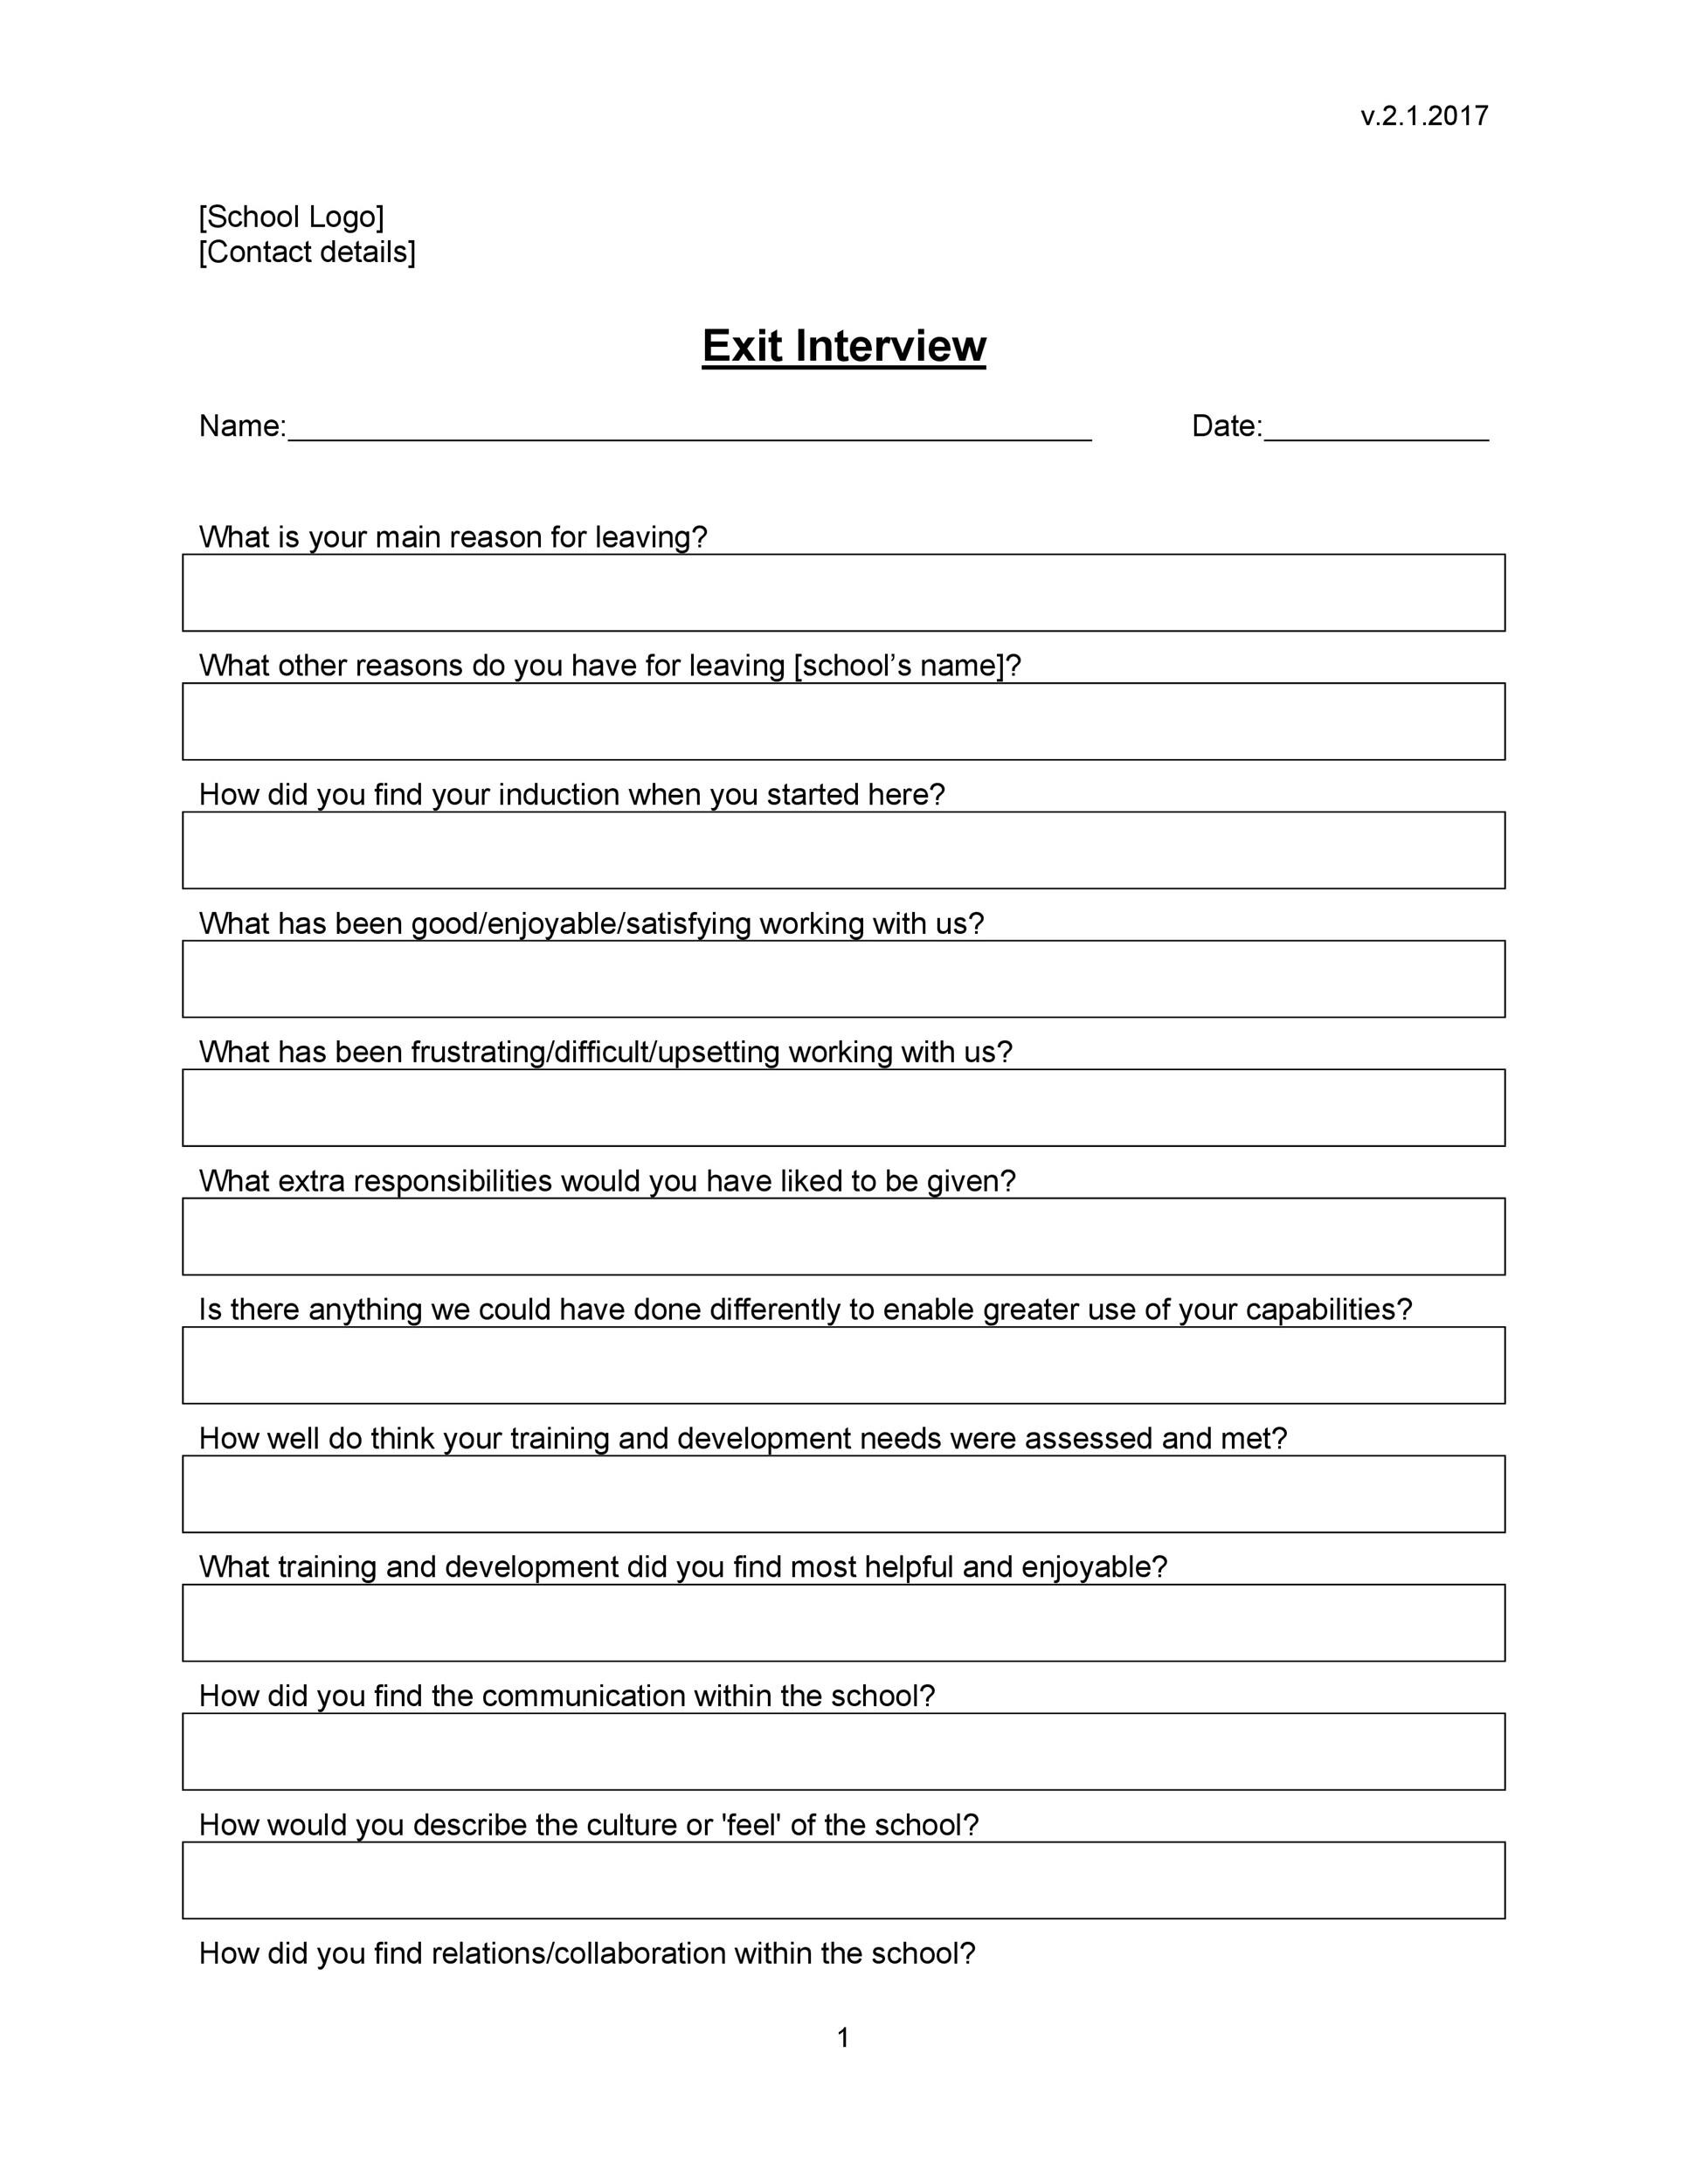 Interview Question Template from templatelab.com